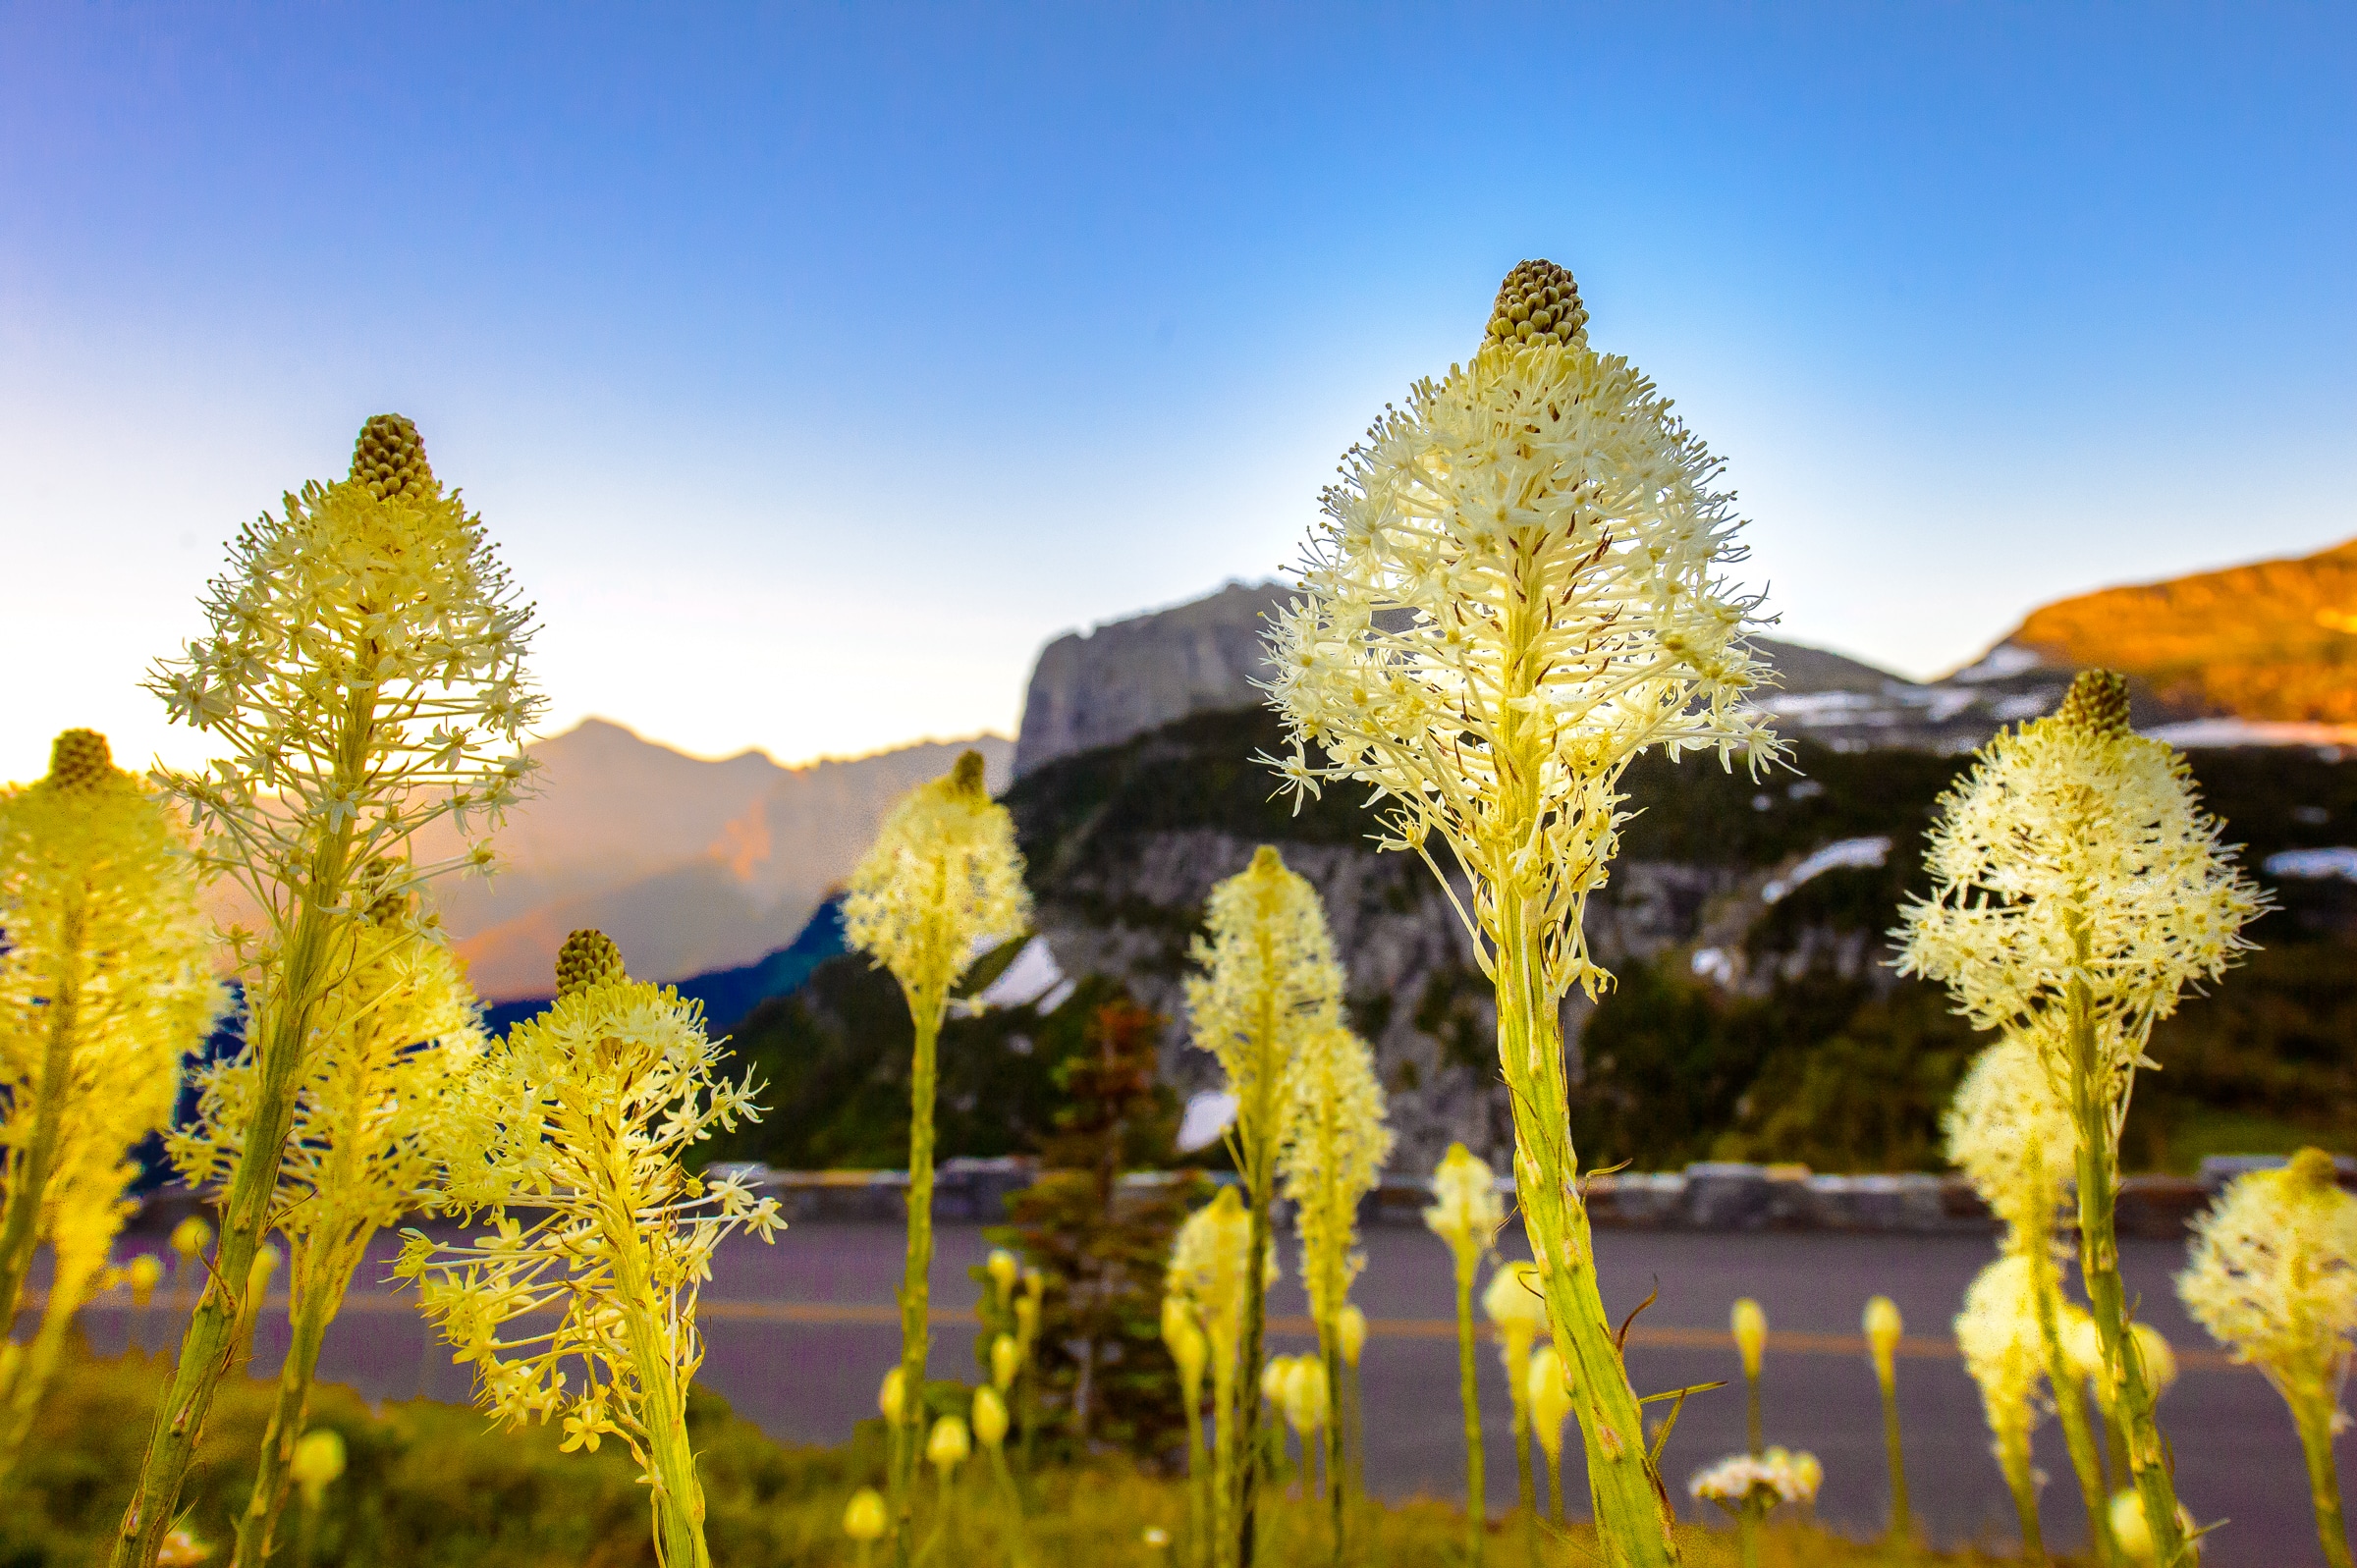 Bear Grass sentinals grow along the Going-to-the-Sun Road in Glacier National Park, Montana.